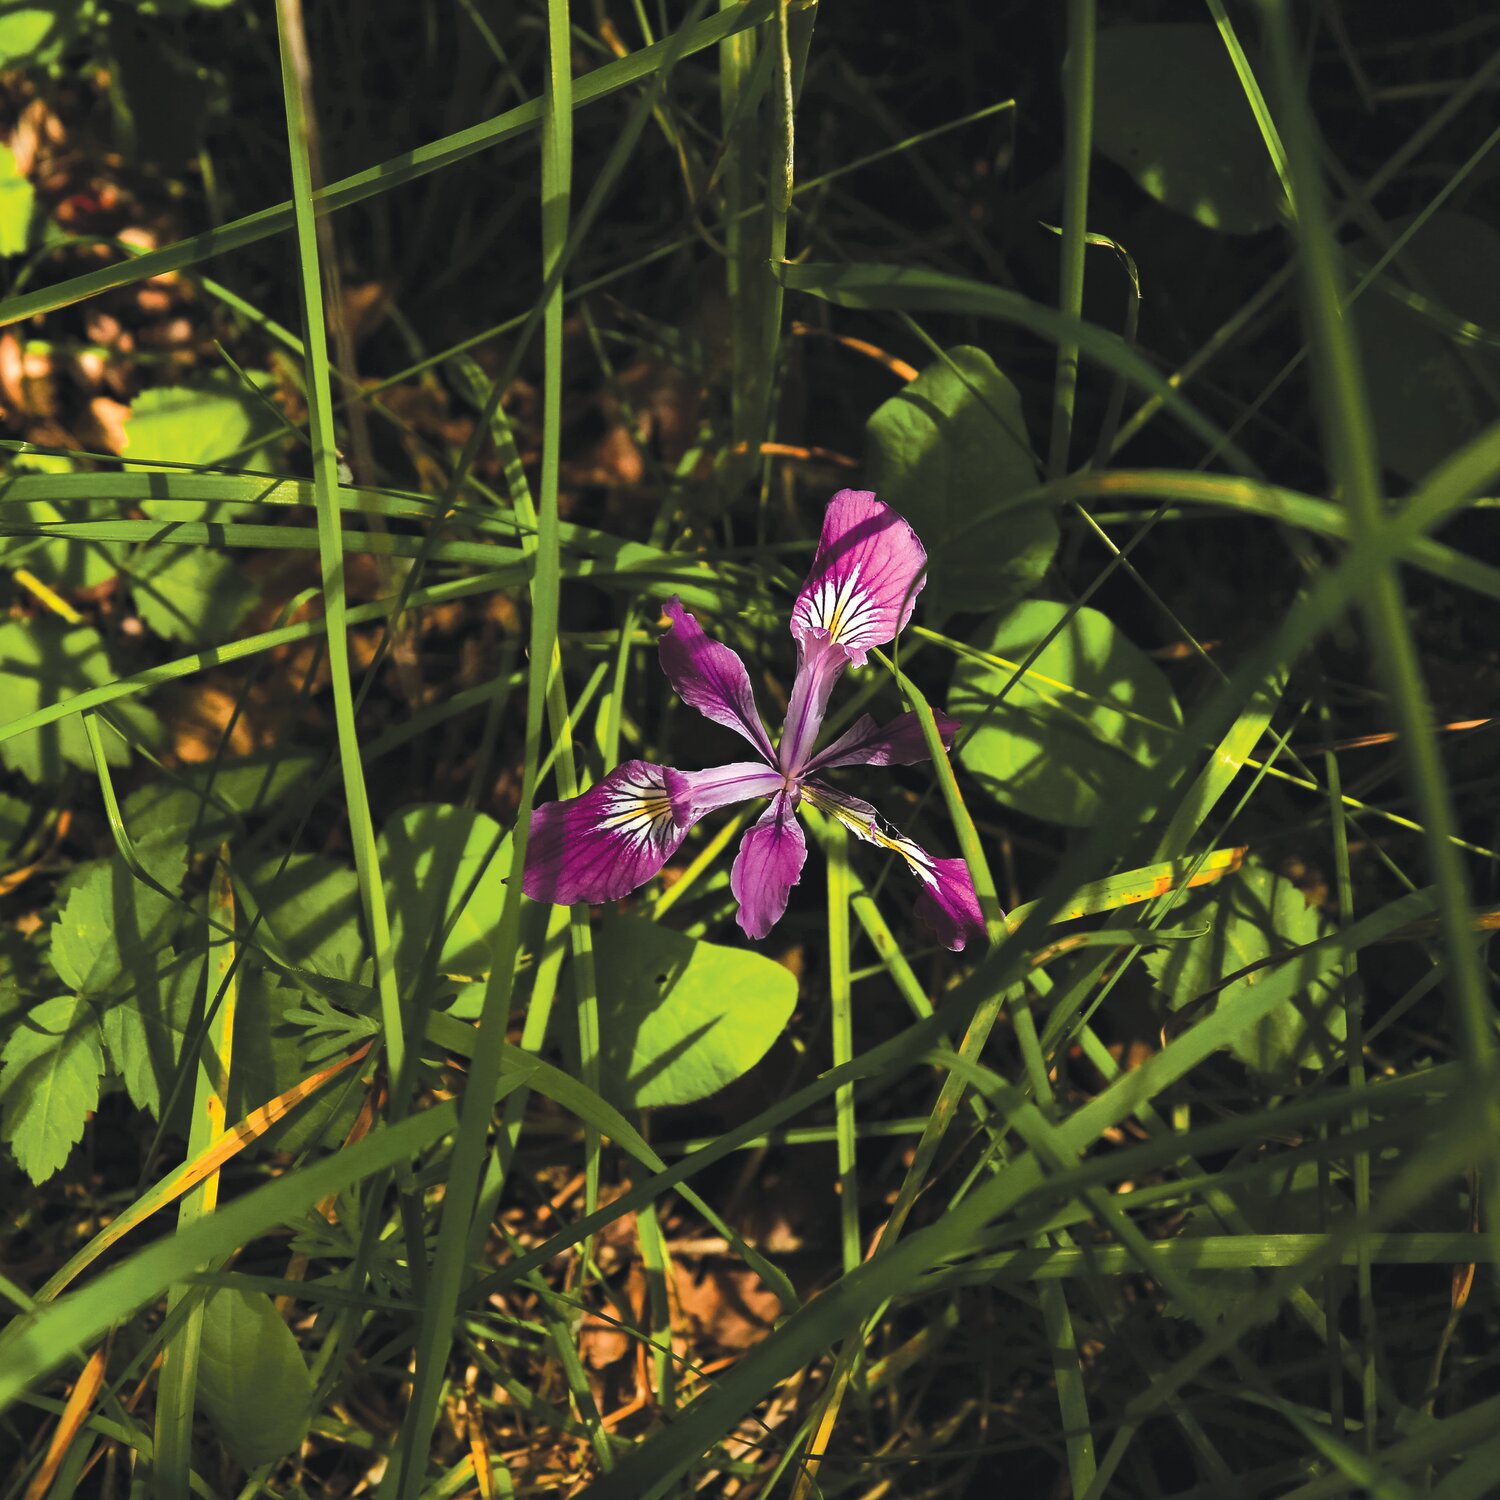 The Oregon iris flower is seen here in the wild. The flower is one of many that will be available for purchase in the Clark Conservation District’s native plant sale.